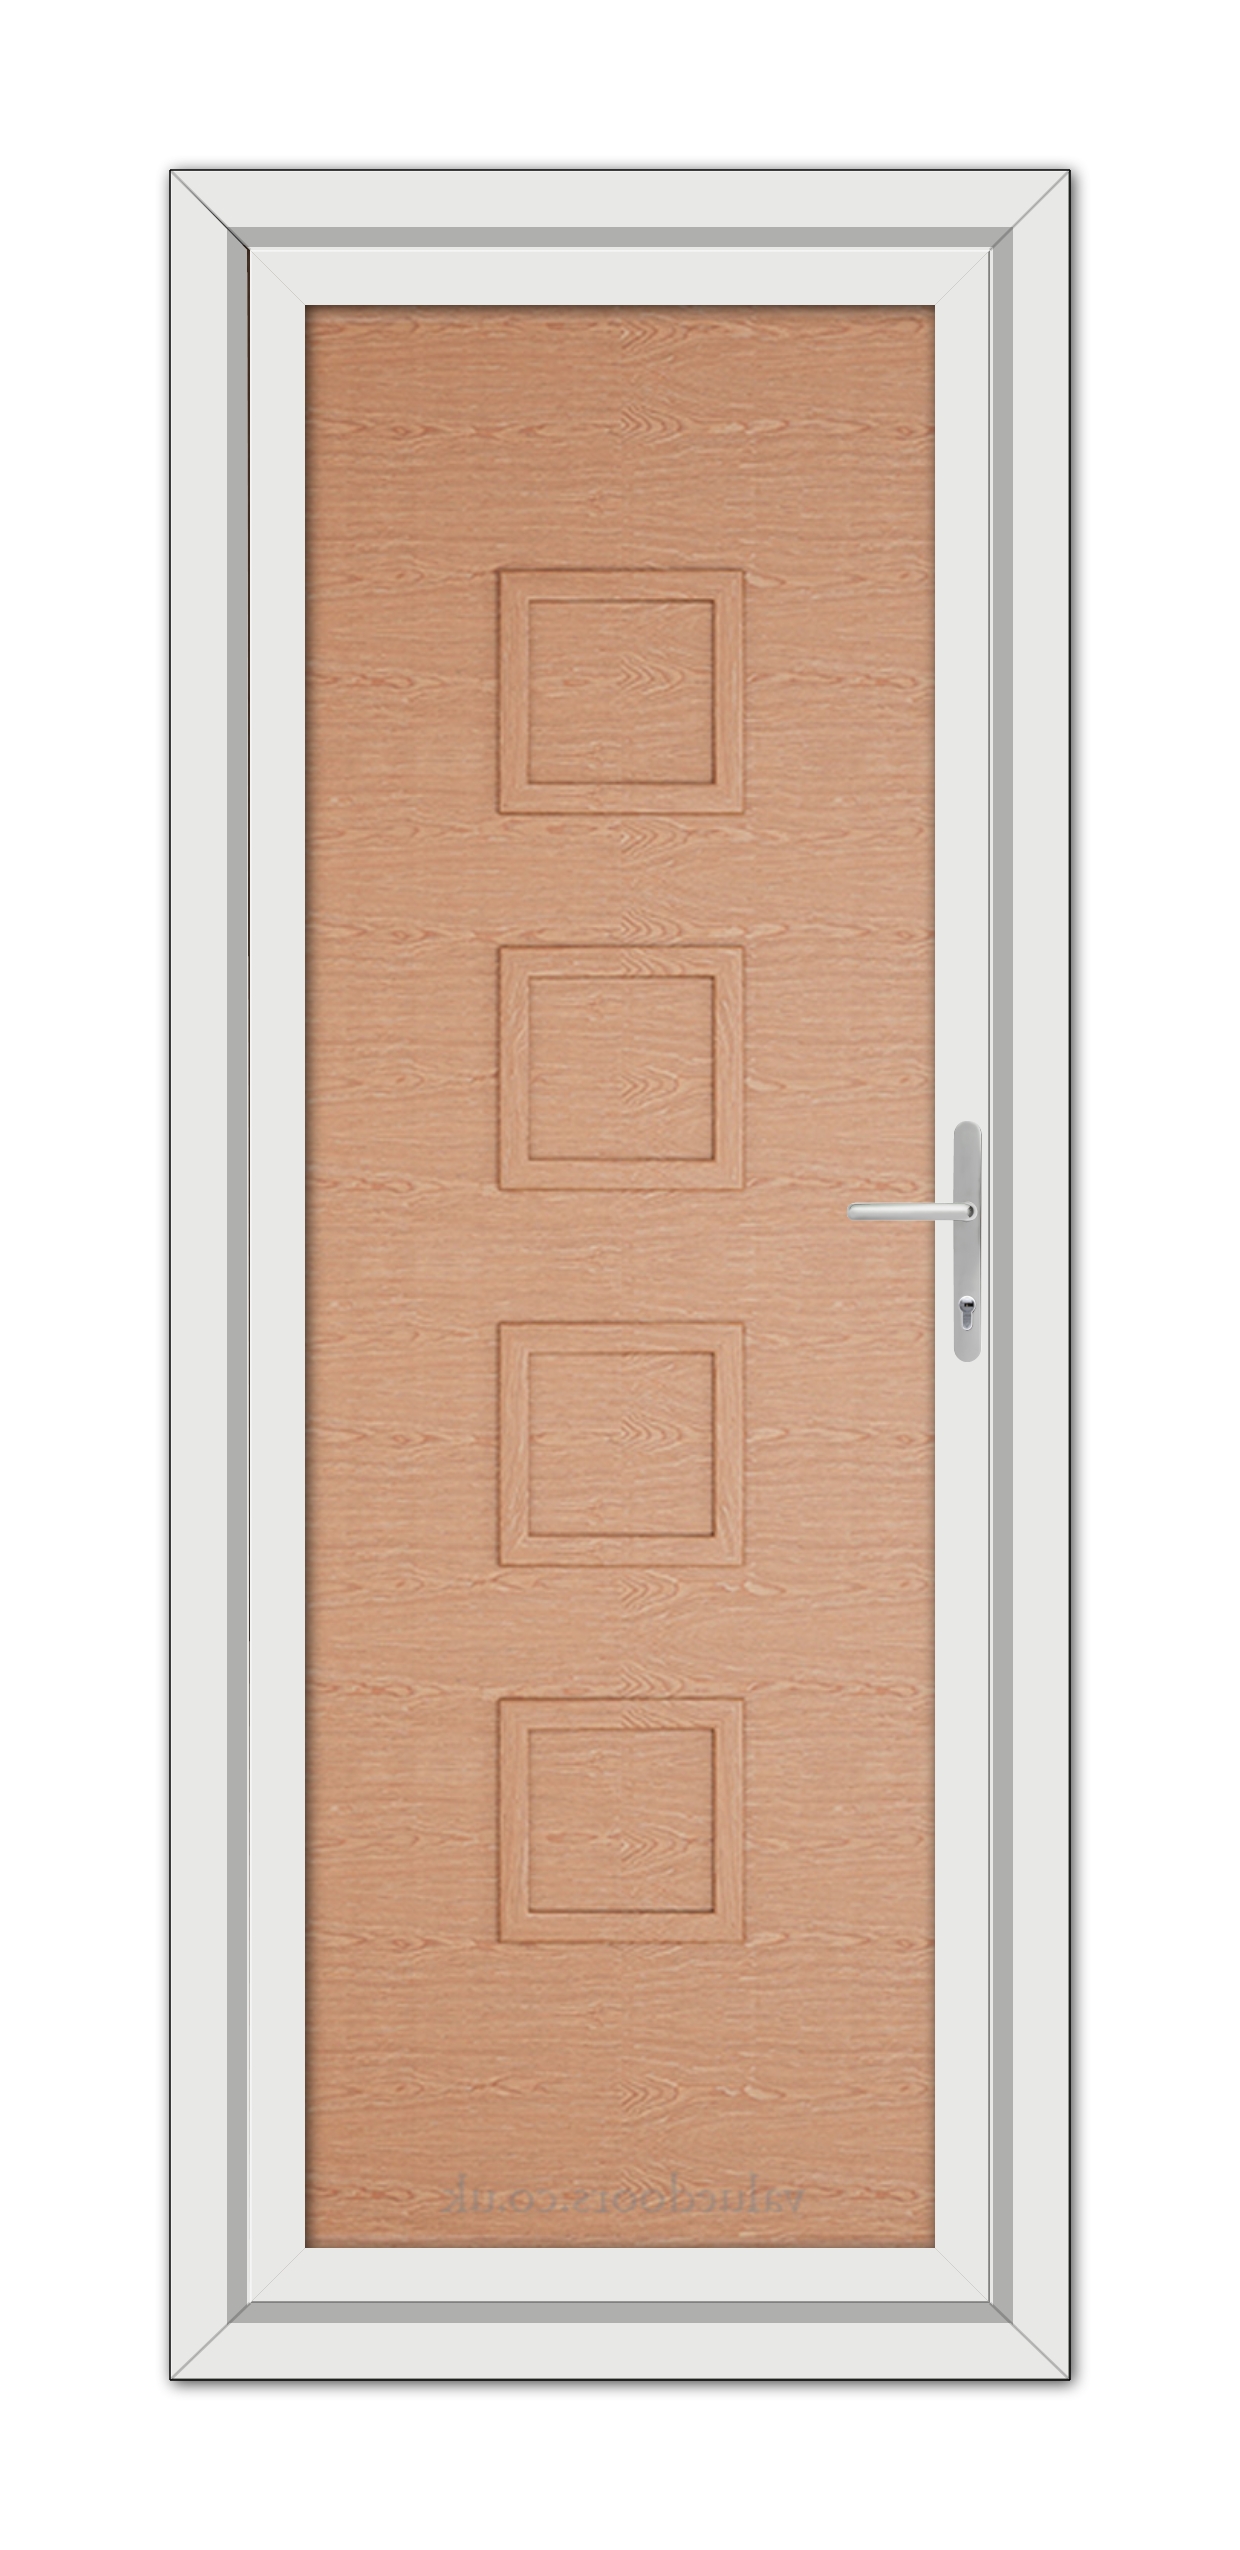 A vertical image of a Irish Oak Modern 5034 Solid uPVC door with a wooden finish and four rectangular panels, framed in white with a metal handle on the right.